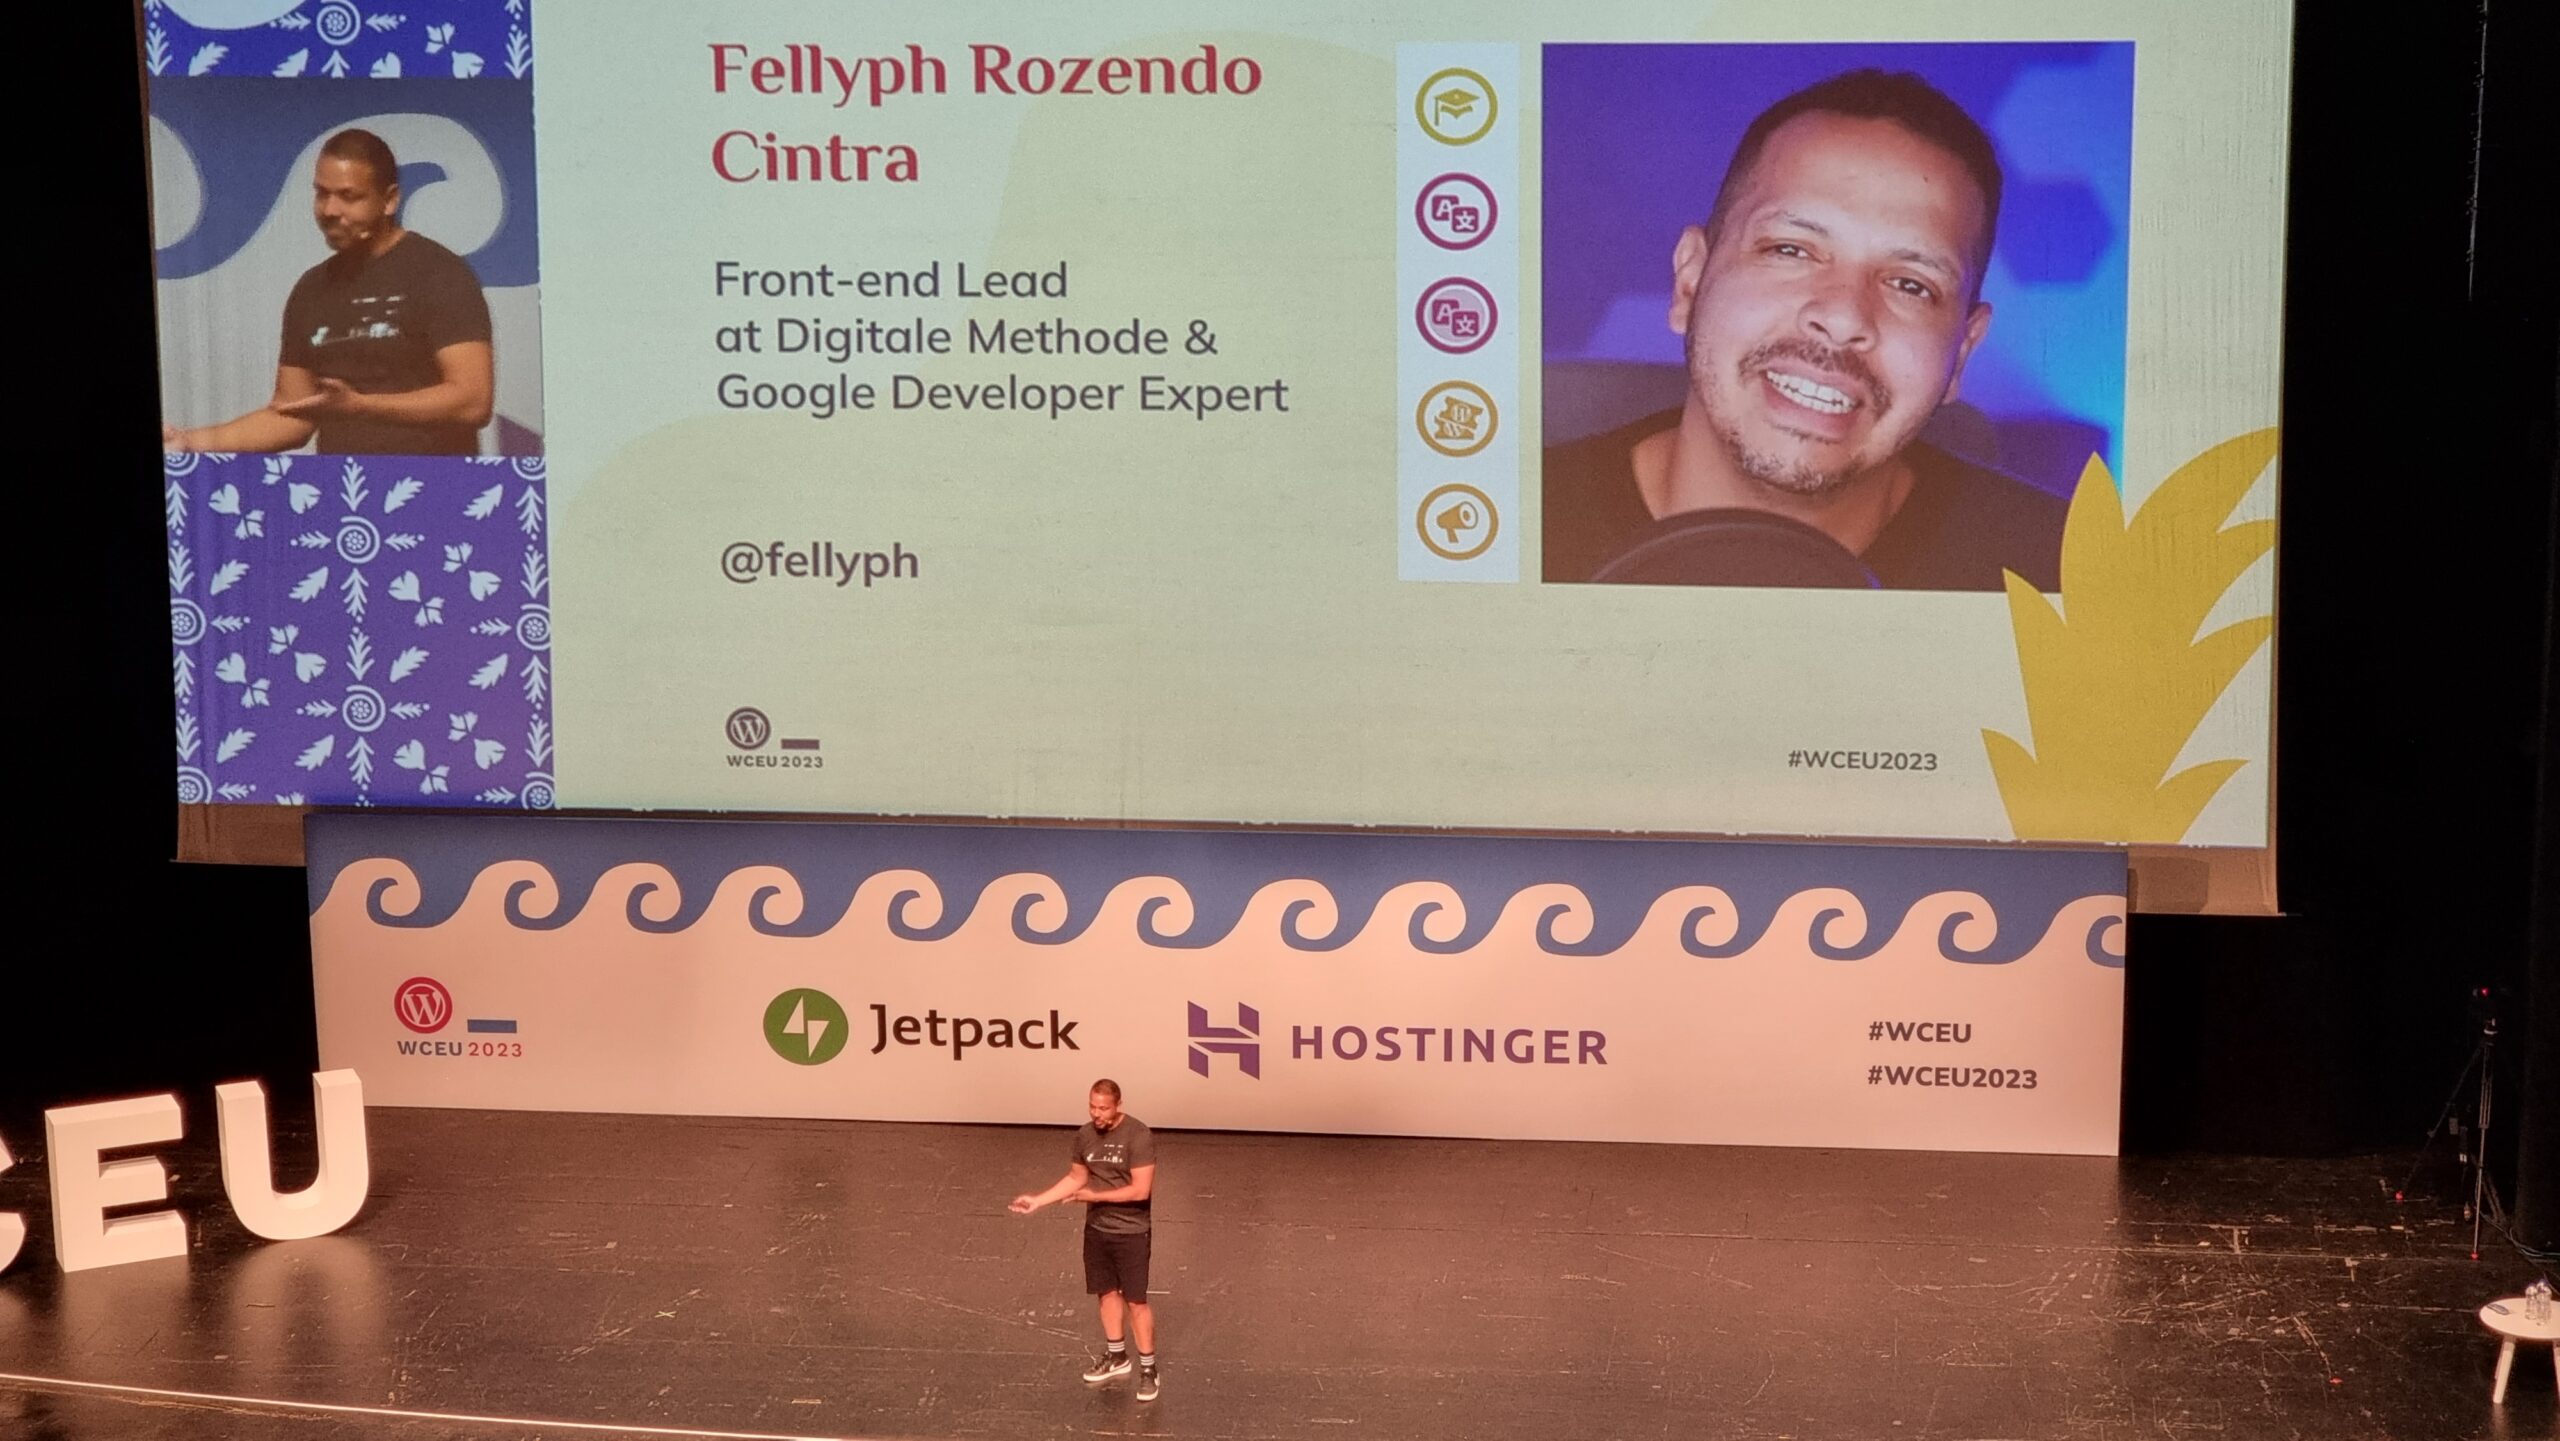 Fellyph Cintra stands in front of a large screen showing a slide that introduces himself to his audience: "Front-end Lead at Digitale Methode & Google Developer Expert @fellyph"